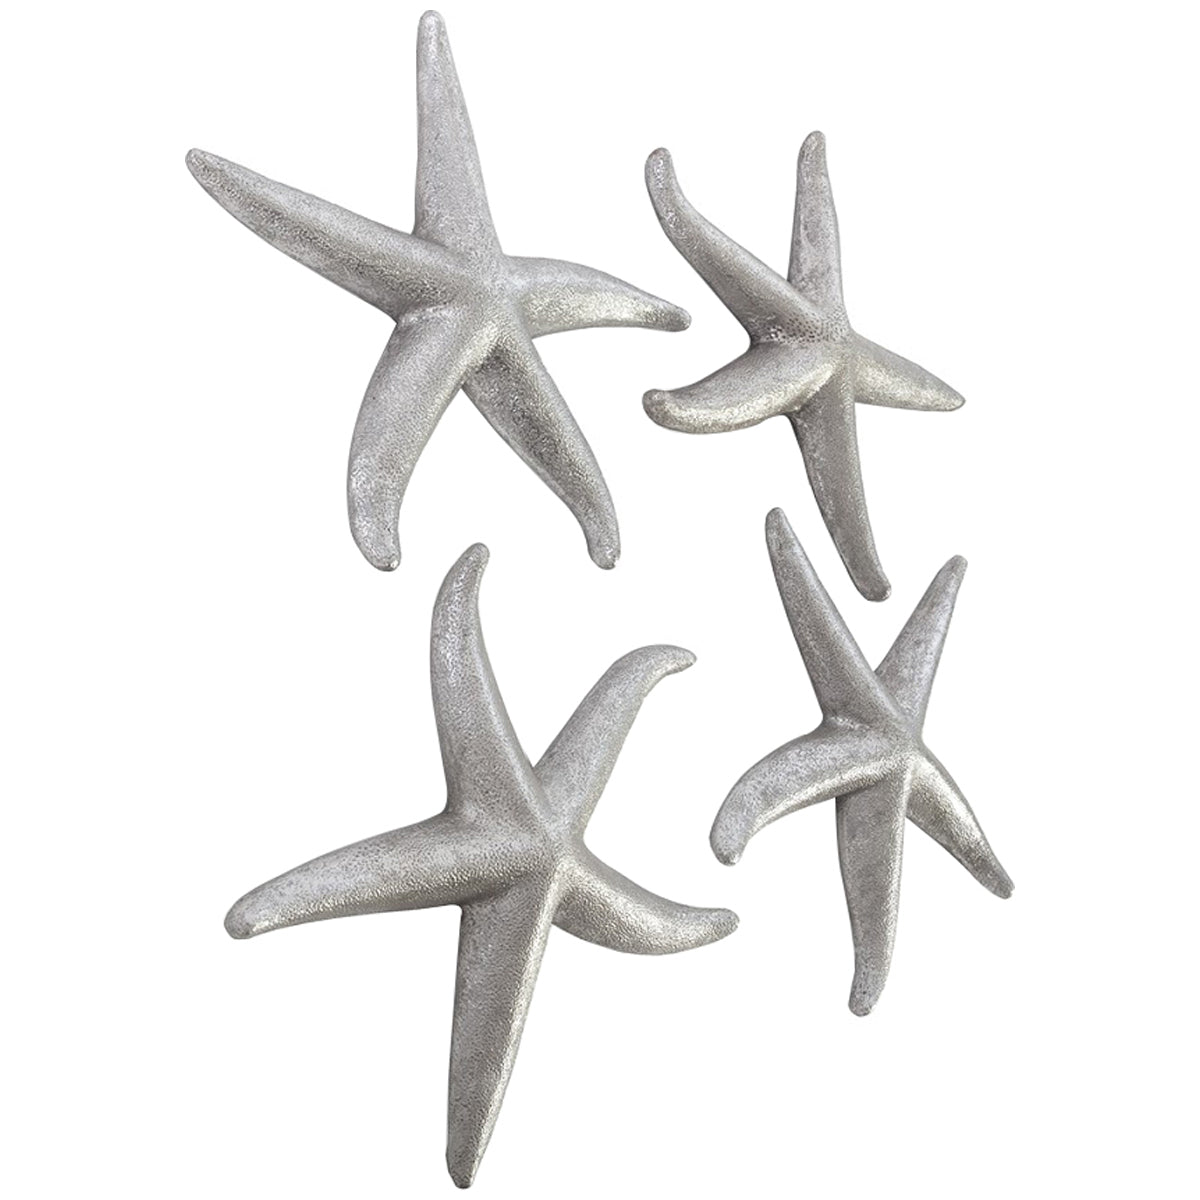 Phillips Collection Starfish Sculpture, Set of 4